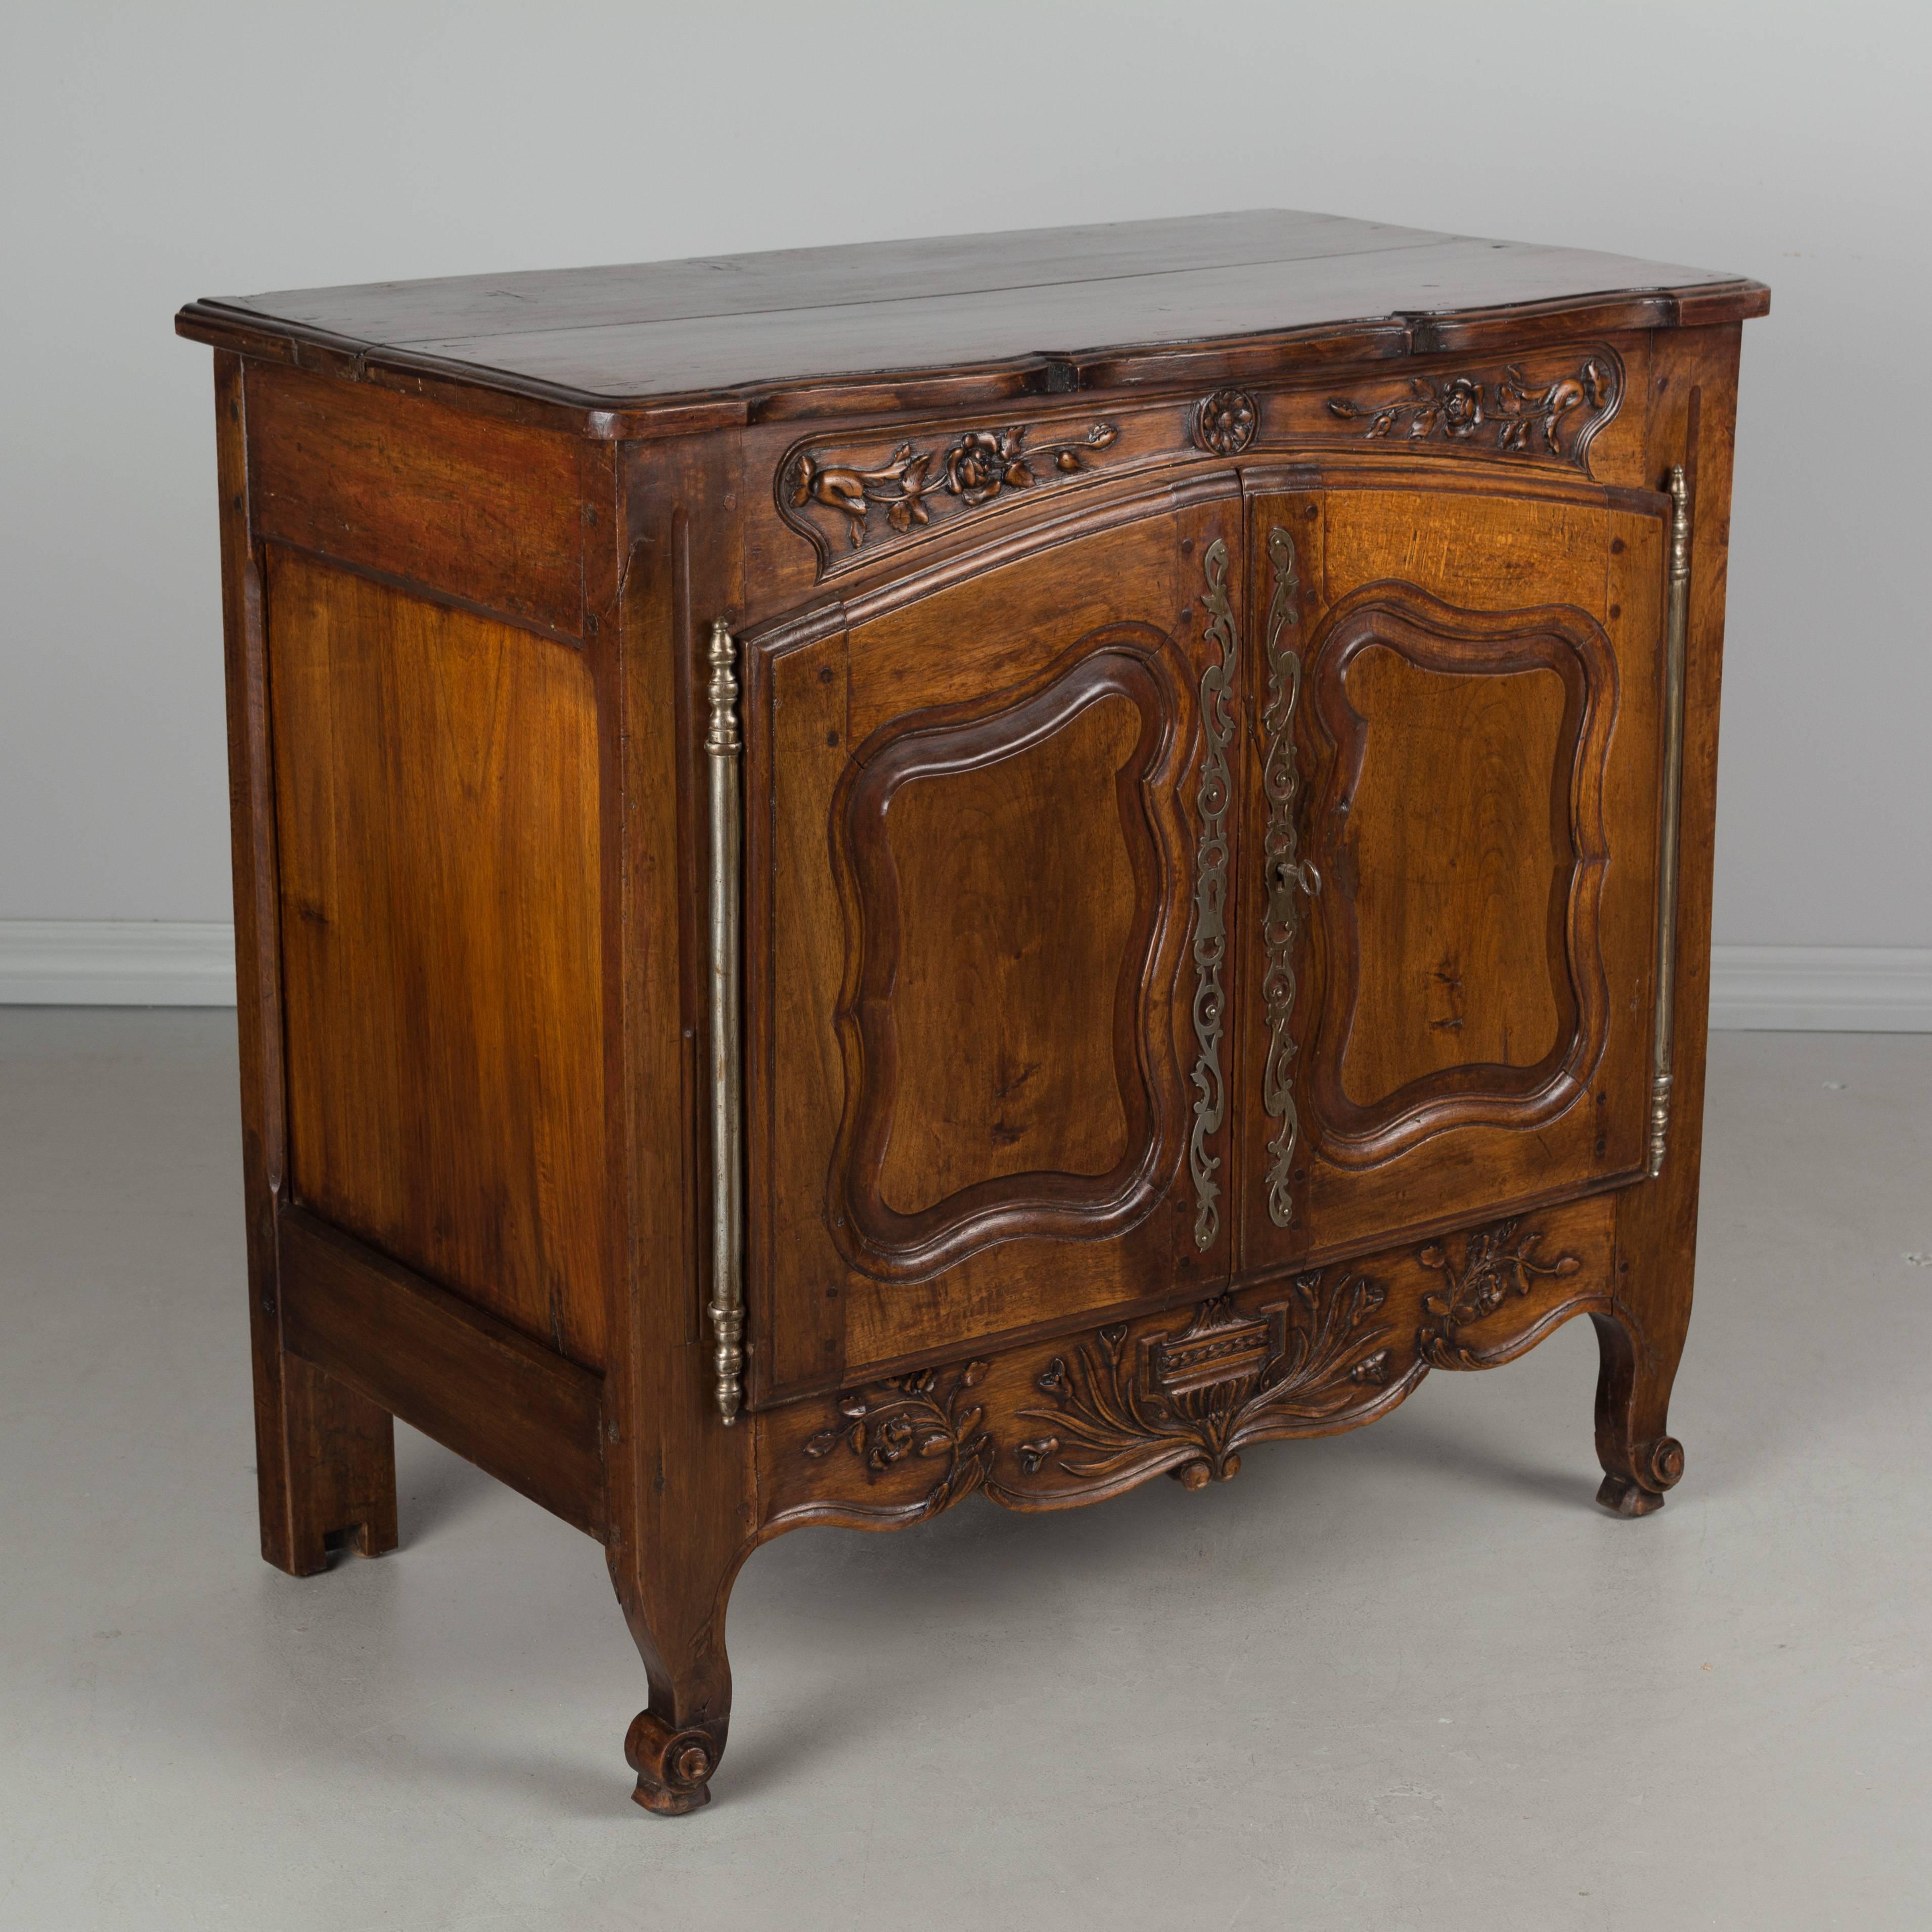 A Country French, Louis XV style buffet from Provence. Made of solid walnut with nice hand-carved decoration especially on the apron. Beautiful wood with waxed finish. Opens to one interior shelf. Carved snail toes in the front. The back legs have